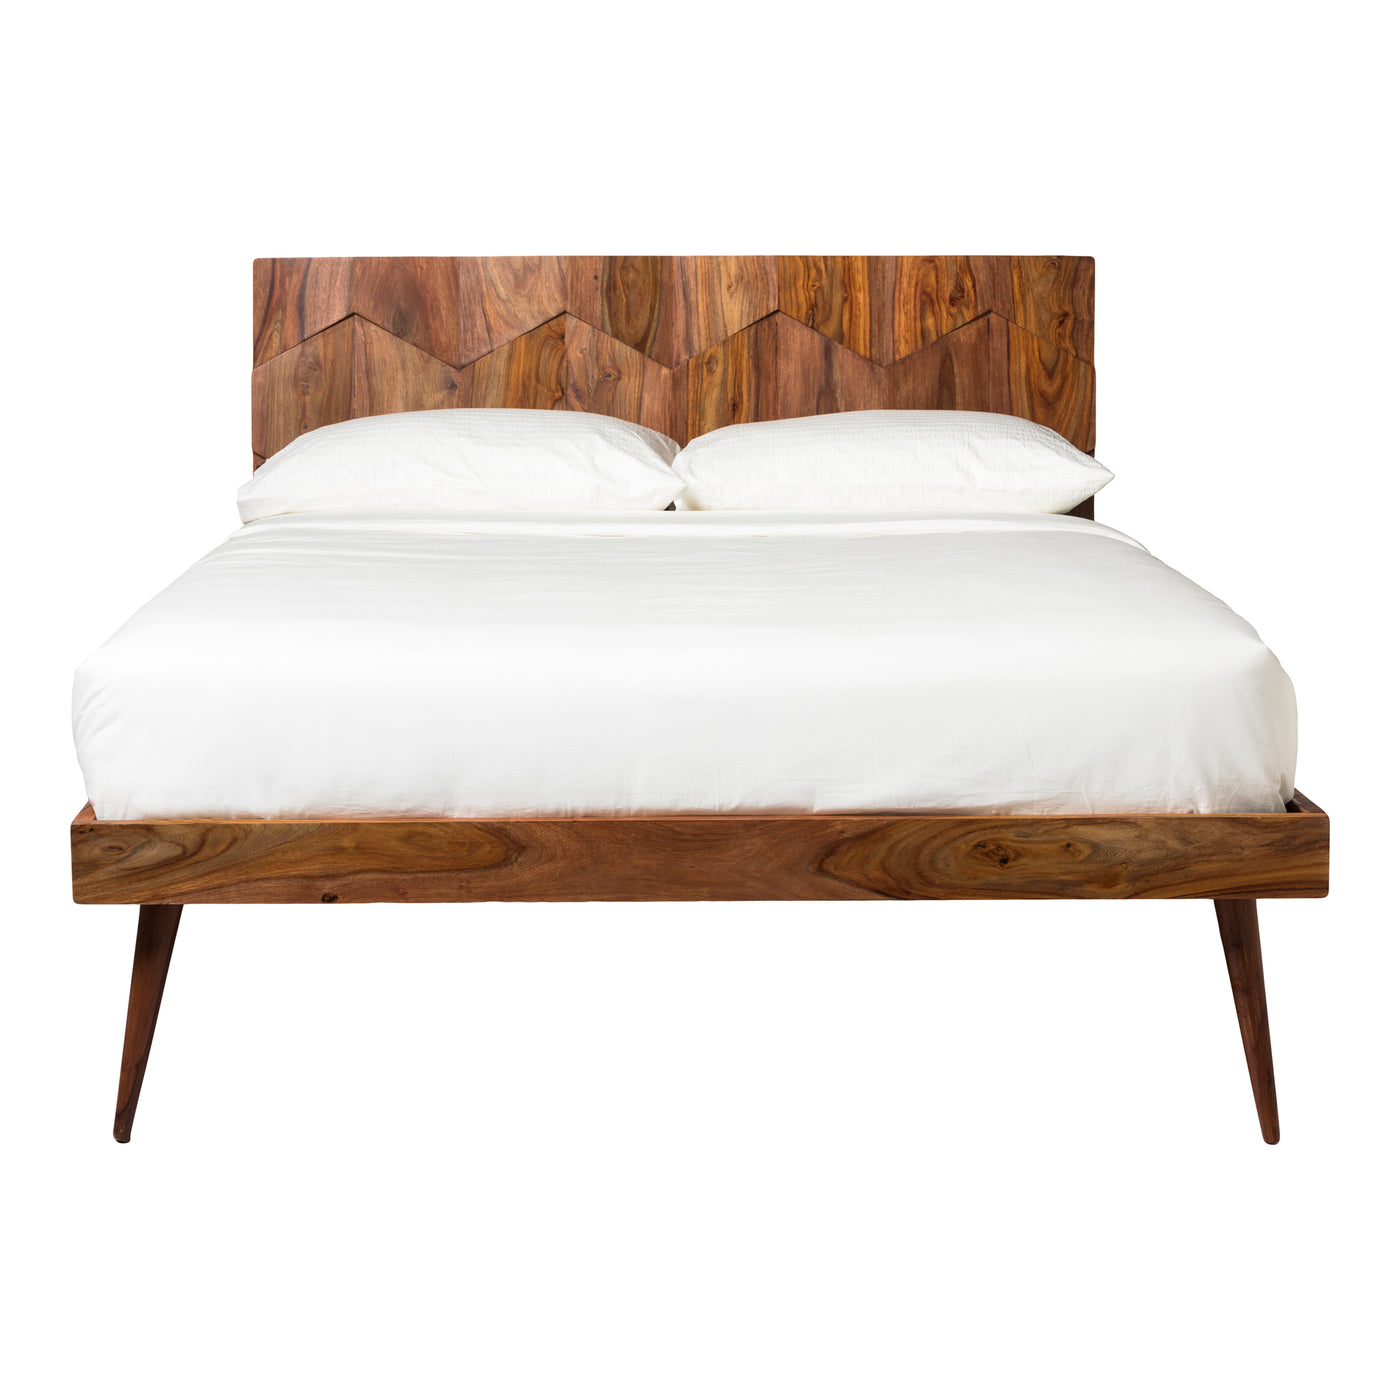 The O2 bed is retro-inspired with a modern twist. Constructed with solid sheesham wood, this piece makes it resistant to m...